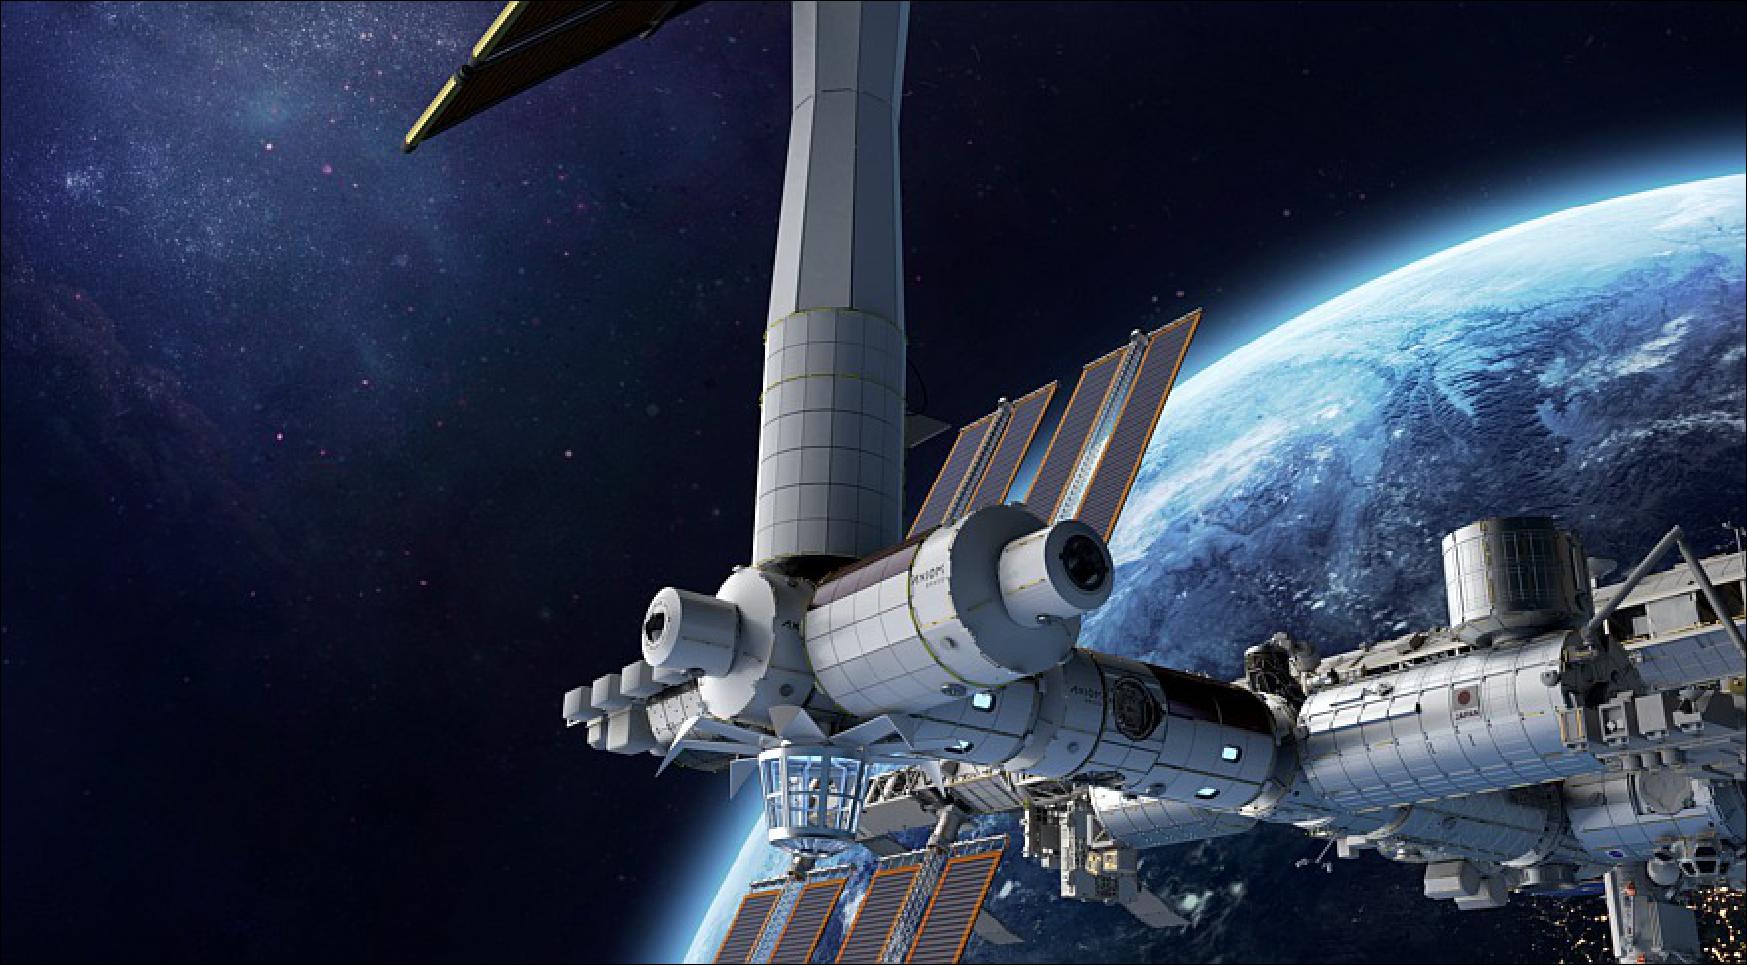 Figure 14: Axiom Space rendering of a future commercial space station (image credit: Axiom Space)